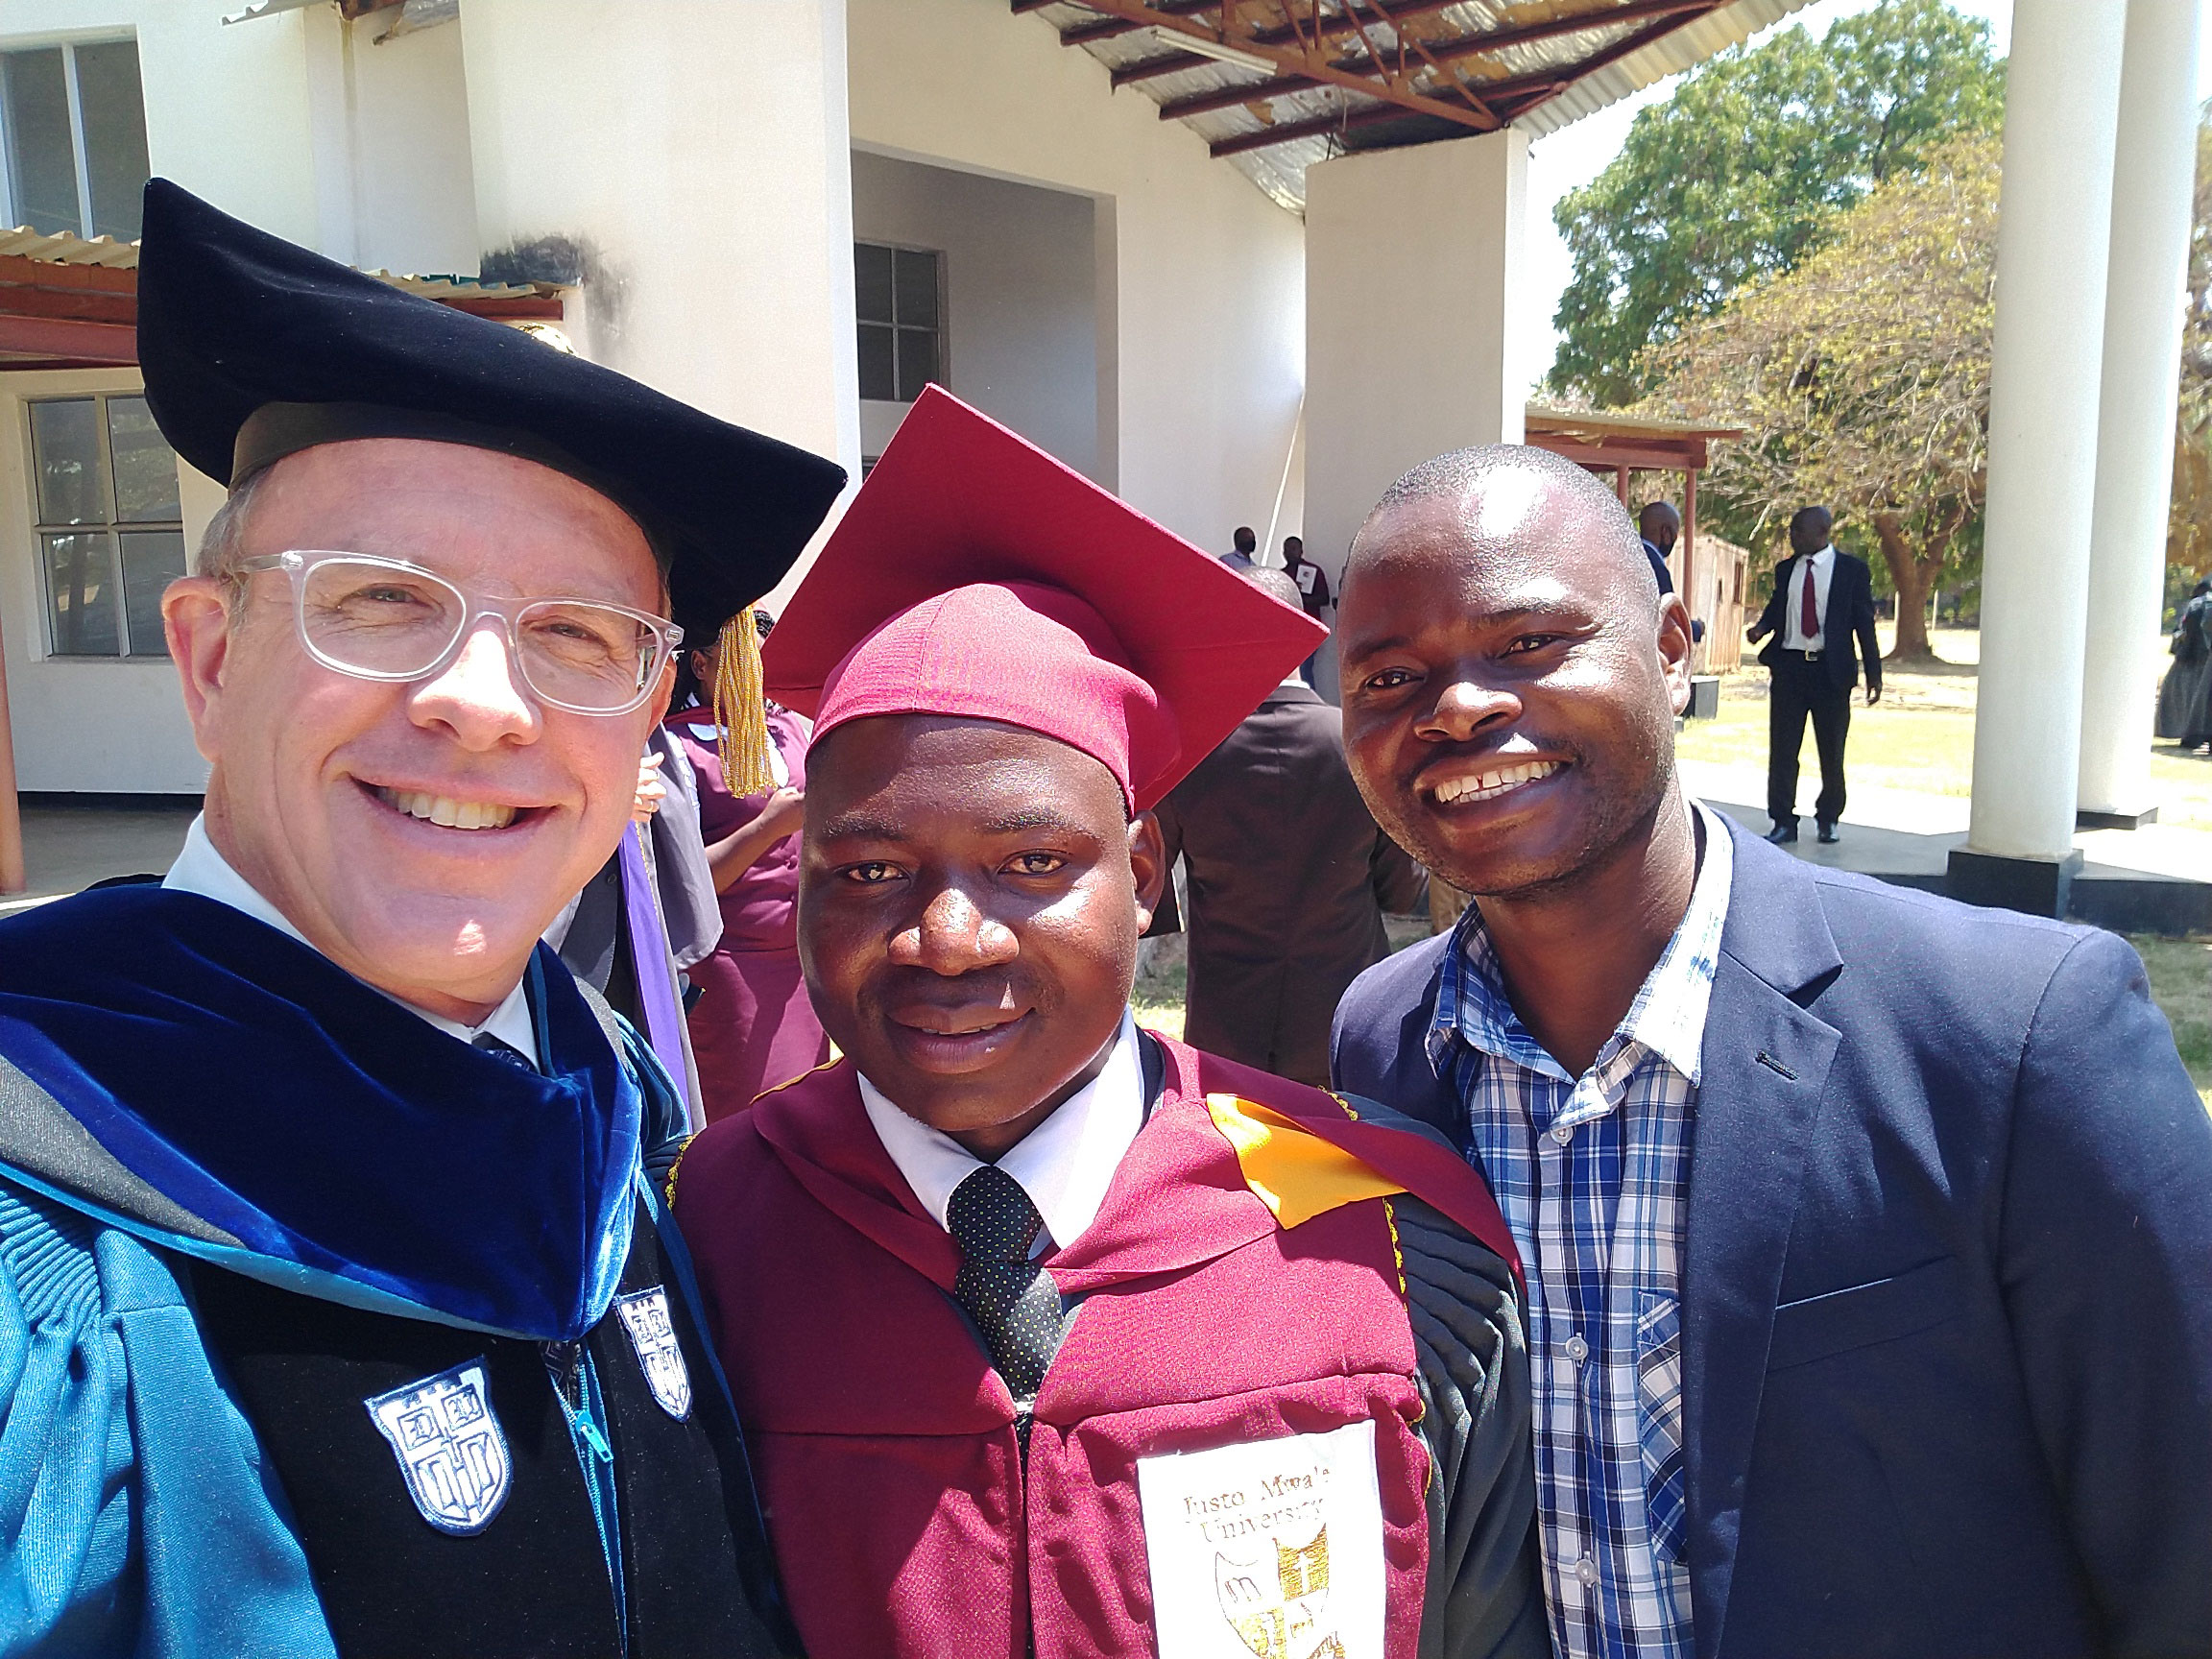 Dustin, John Mokotha and Khumbo Mkandawire at graduation. Having just graduated, John is already pastor of several thousand church members in Malawi. Khumbo hopes to become a theology lecturer.